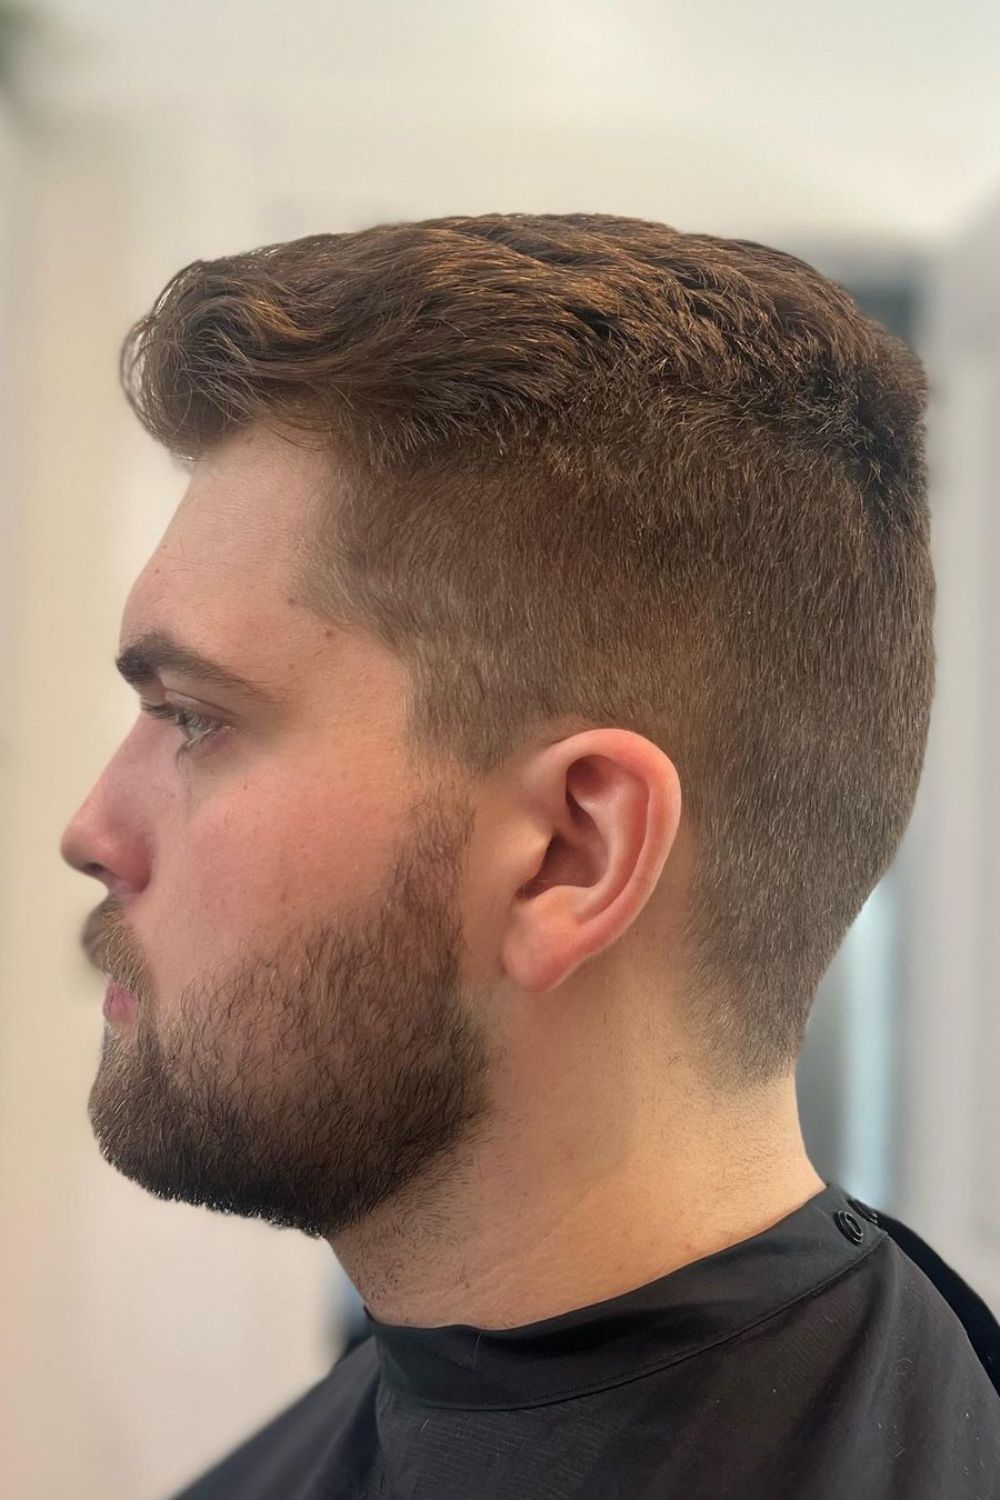 A man with a layered crew haircut.